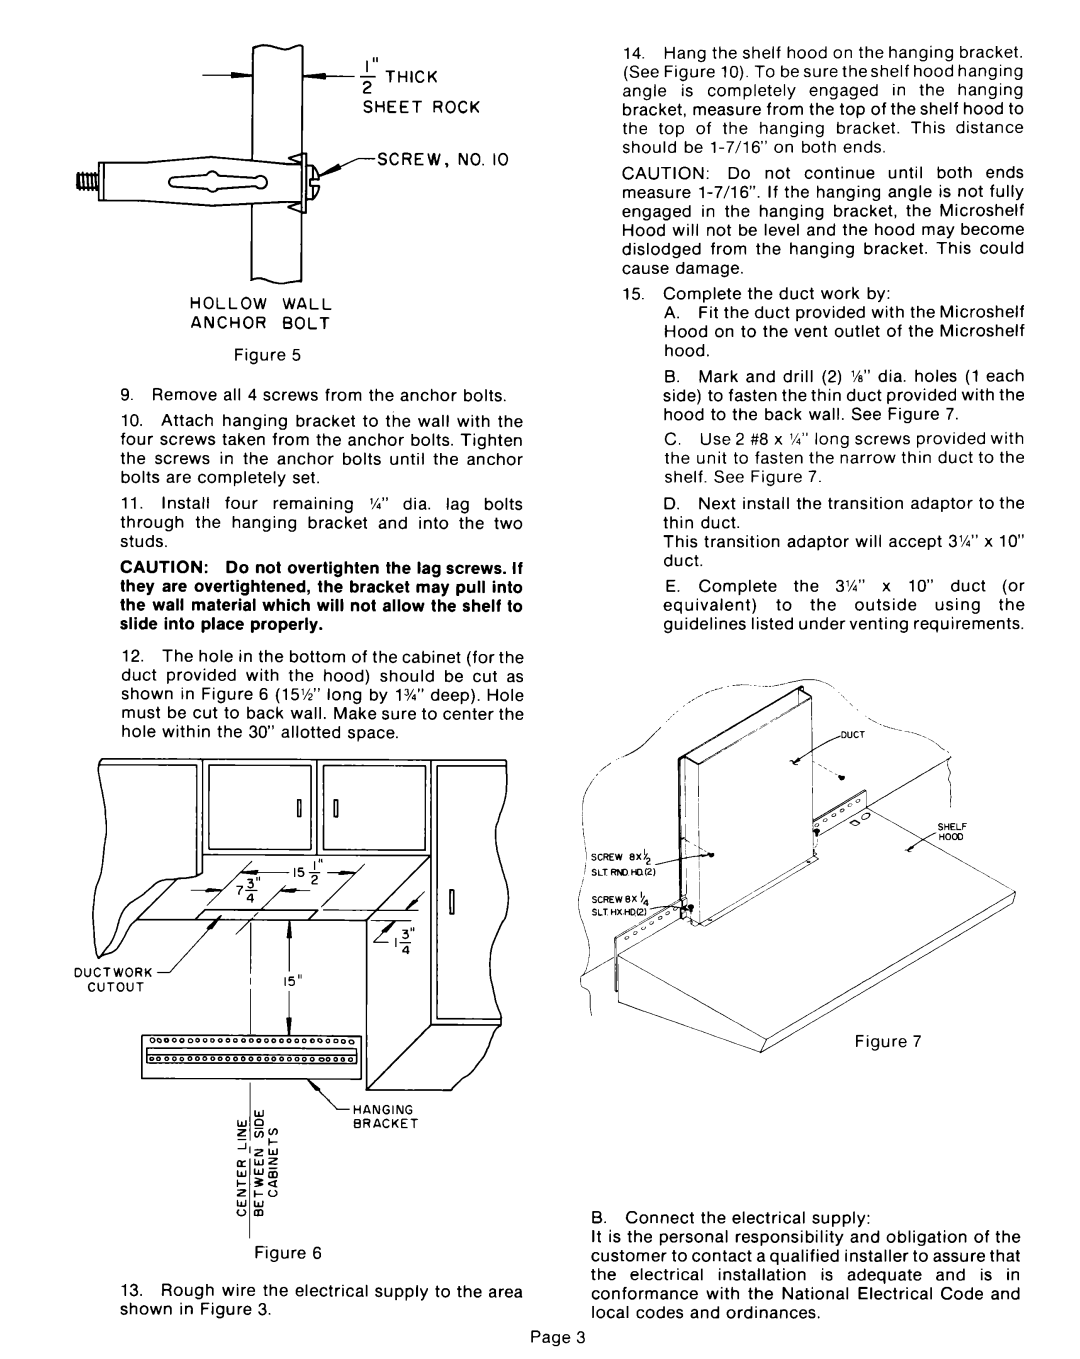 Whirlpool RJH 3330-1 operating instructions 